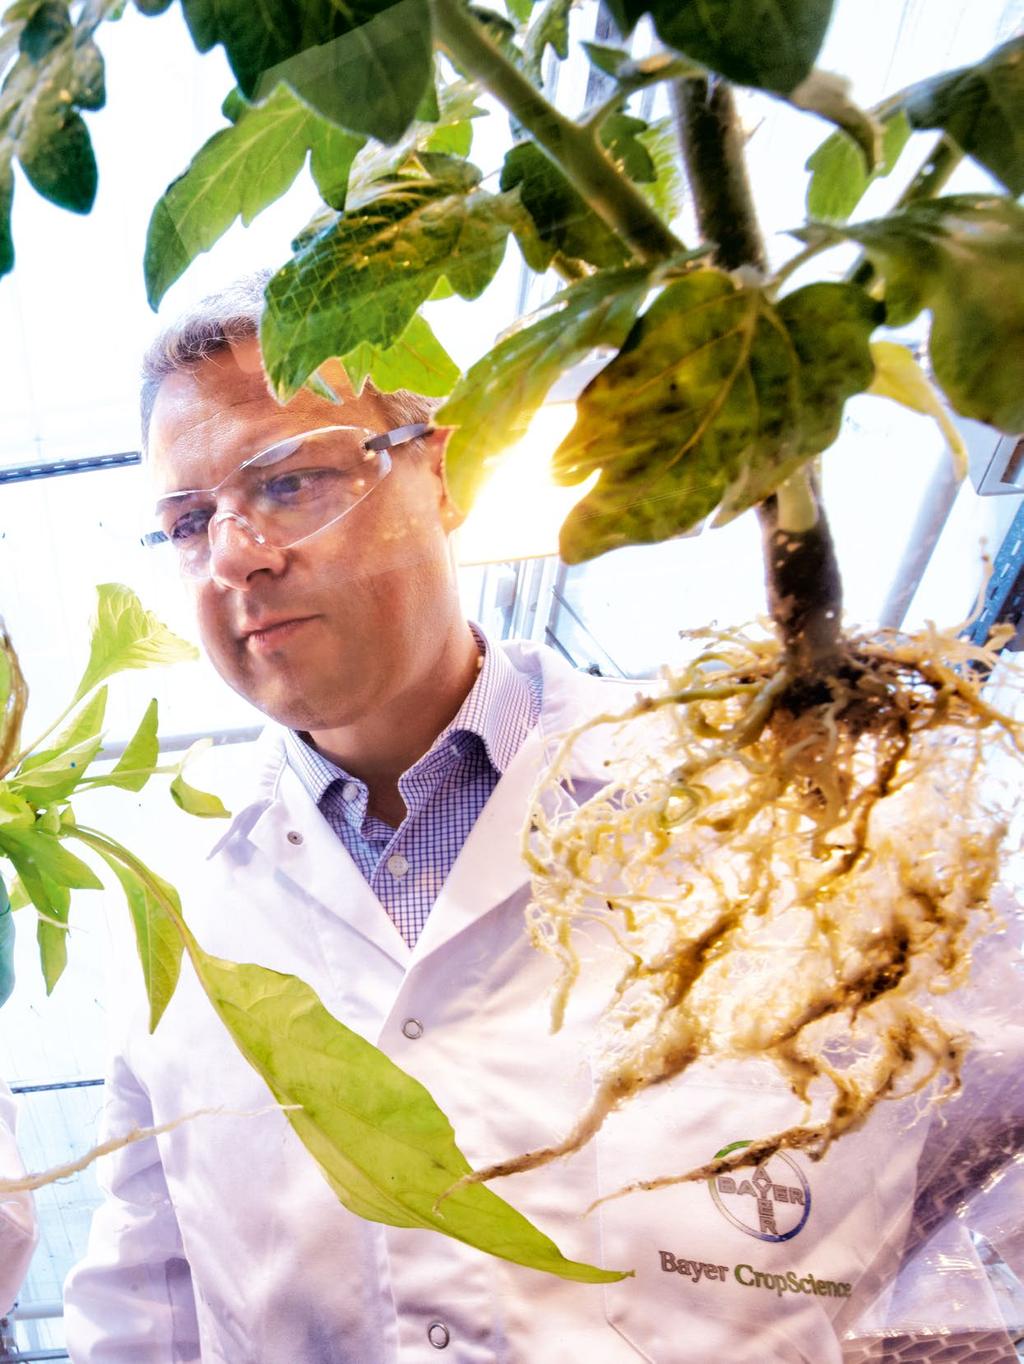 Cover story AGRICULTURE Photos: Peter Ginter/Bayer AG (8), Privat (2) SECURING WORLD FOOD SUPPLIES WITH INTEGRATED CROP PROTECTION Revolution from the ground up Enormous harvest losses all over the